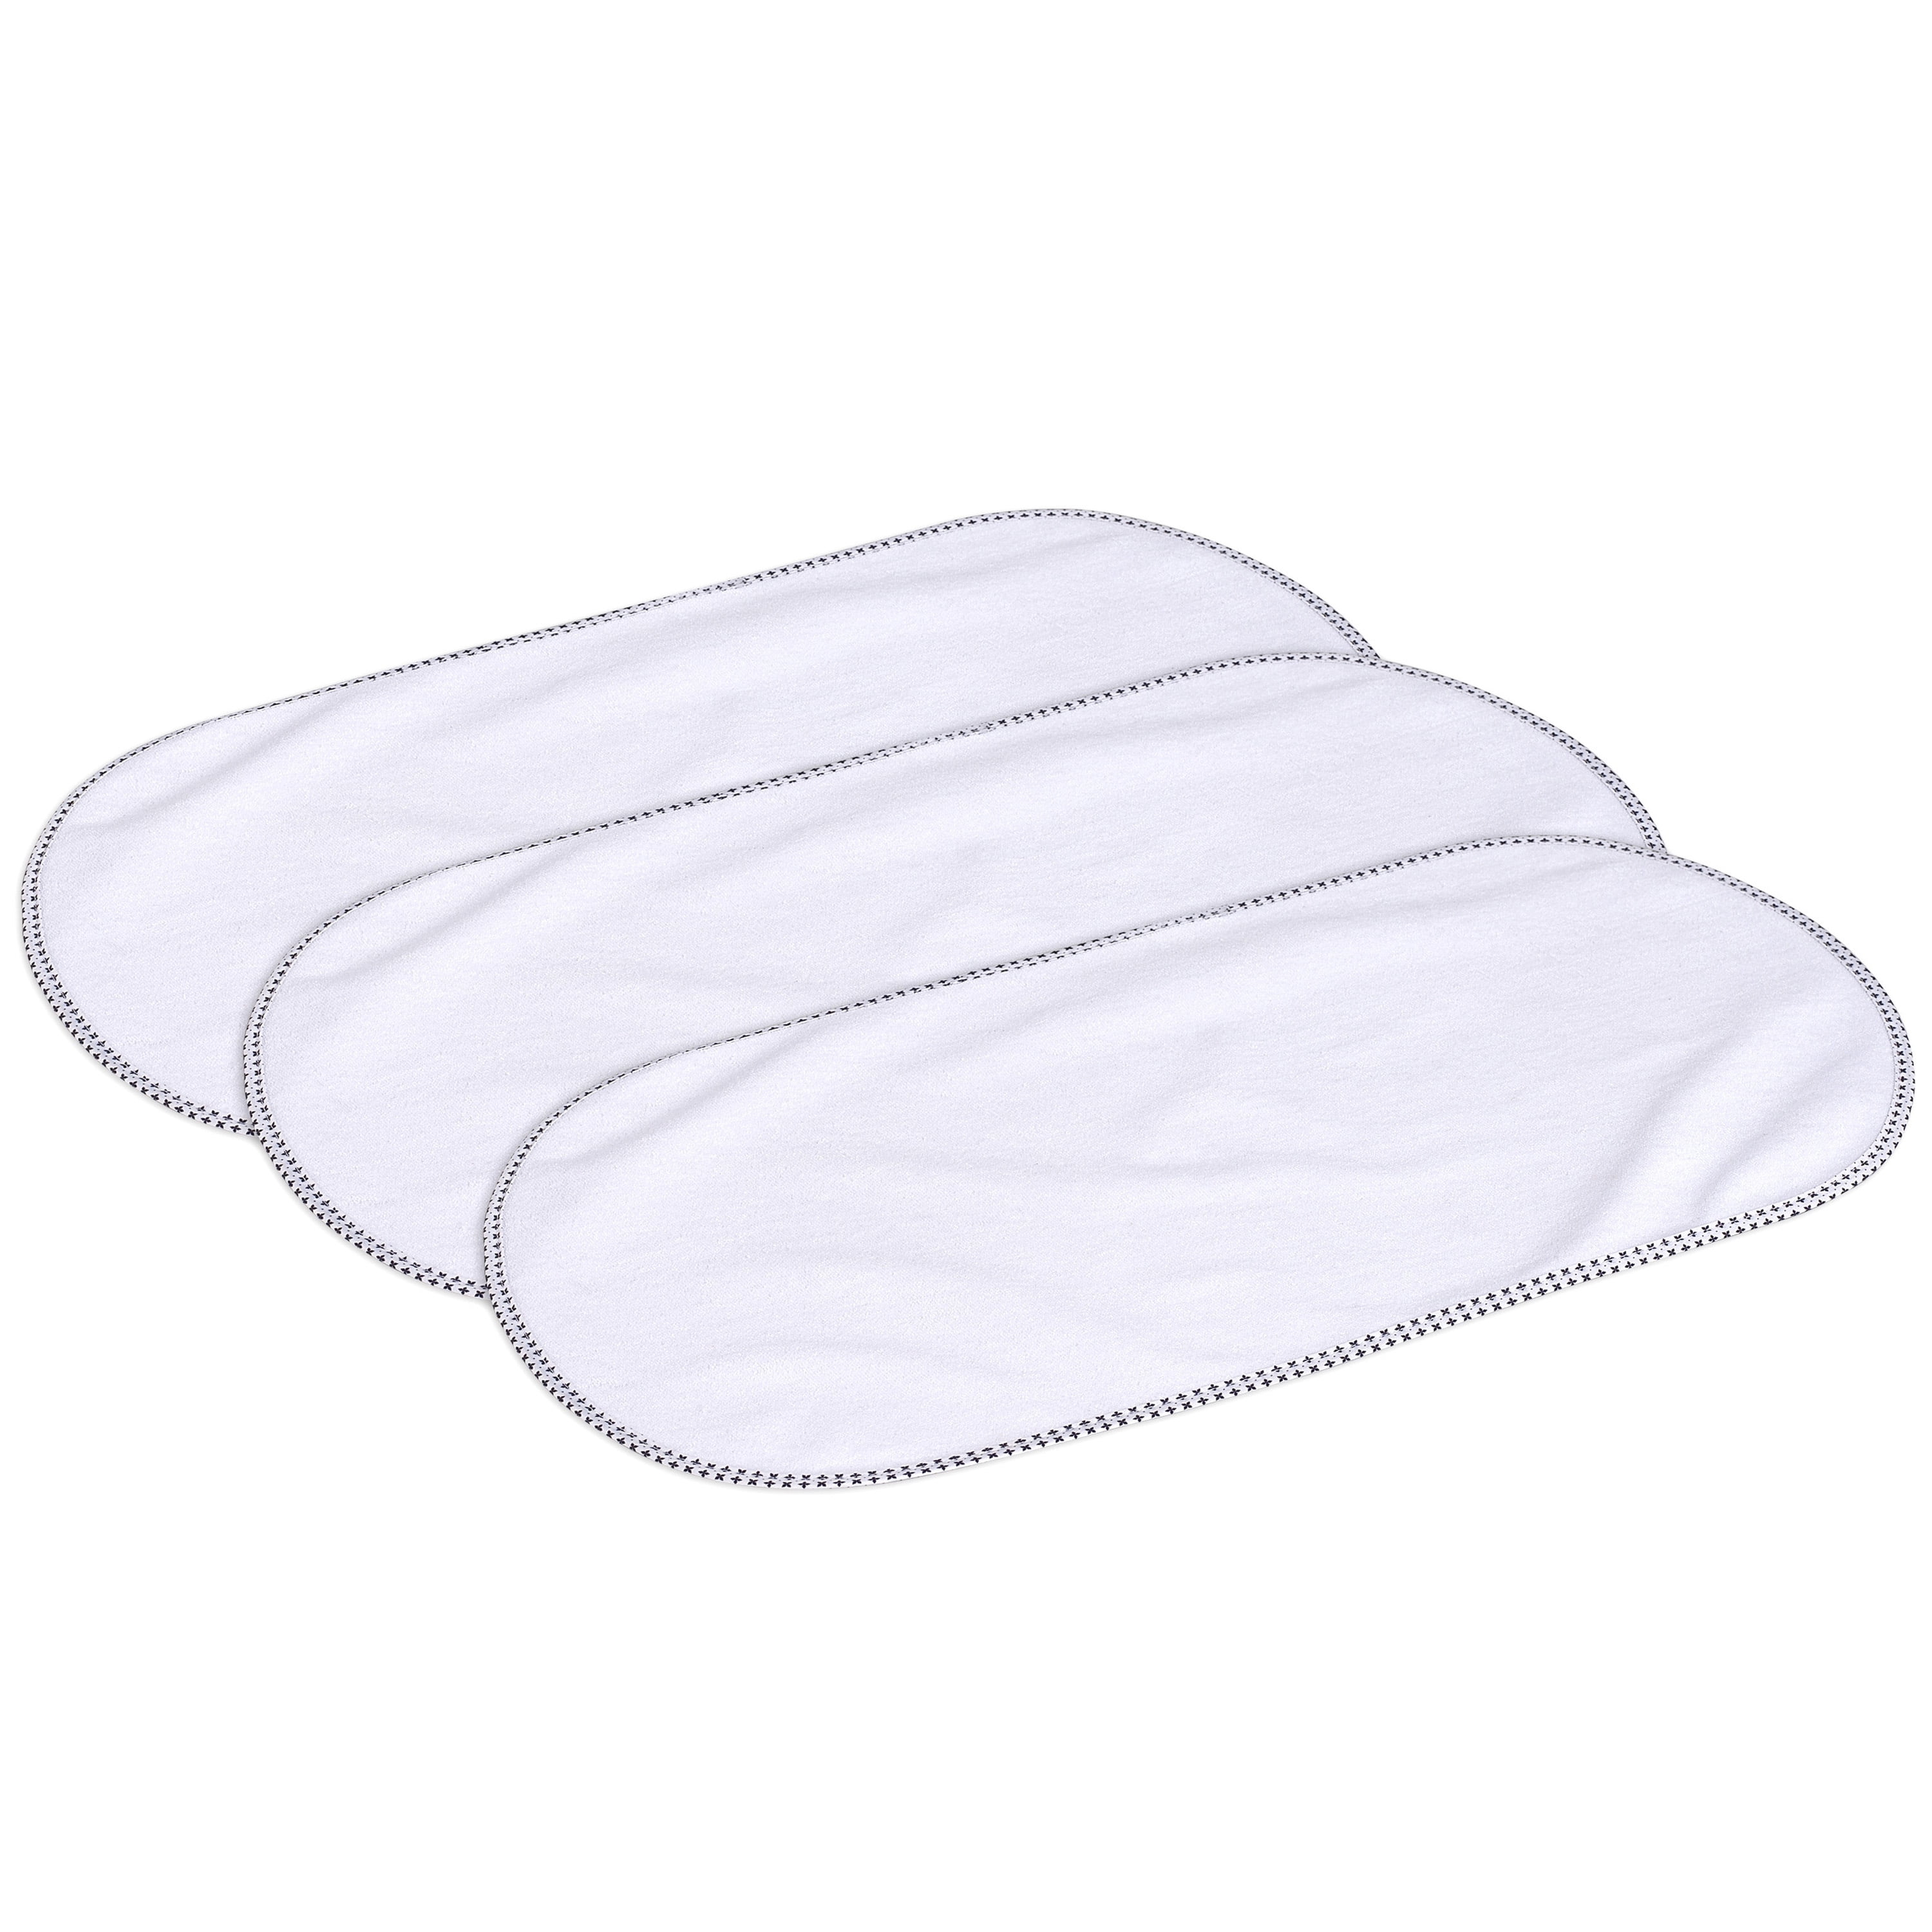 Summer Infant Waterproof Changing Pad Liners 3 Count